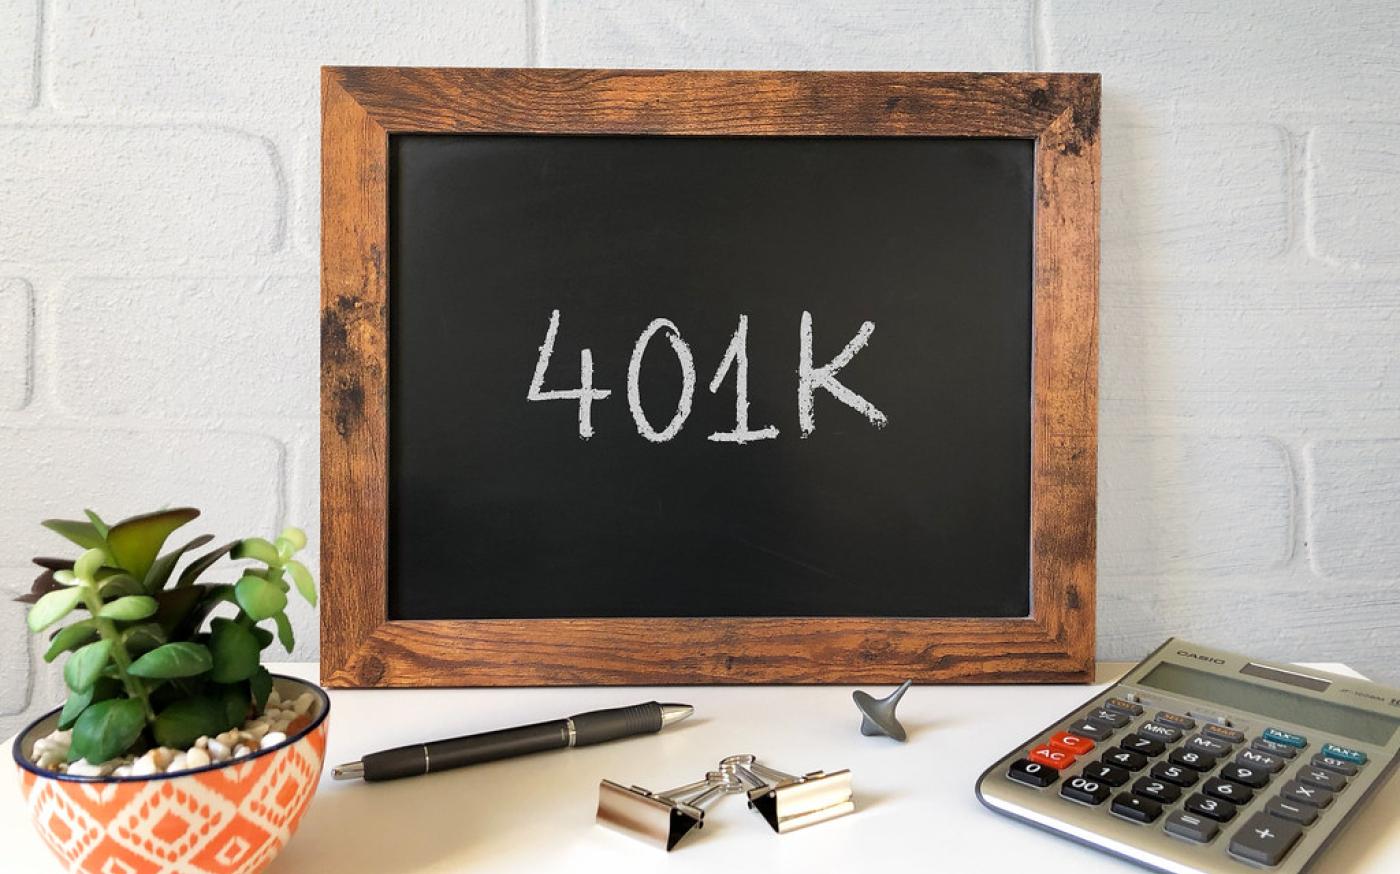 "401K" by Got Credit is licensed with CC BY 2.0. To view a copy of this license, visit https://creativecommons.org/licenses/by/2.0/